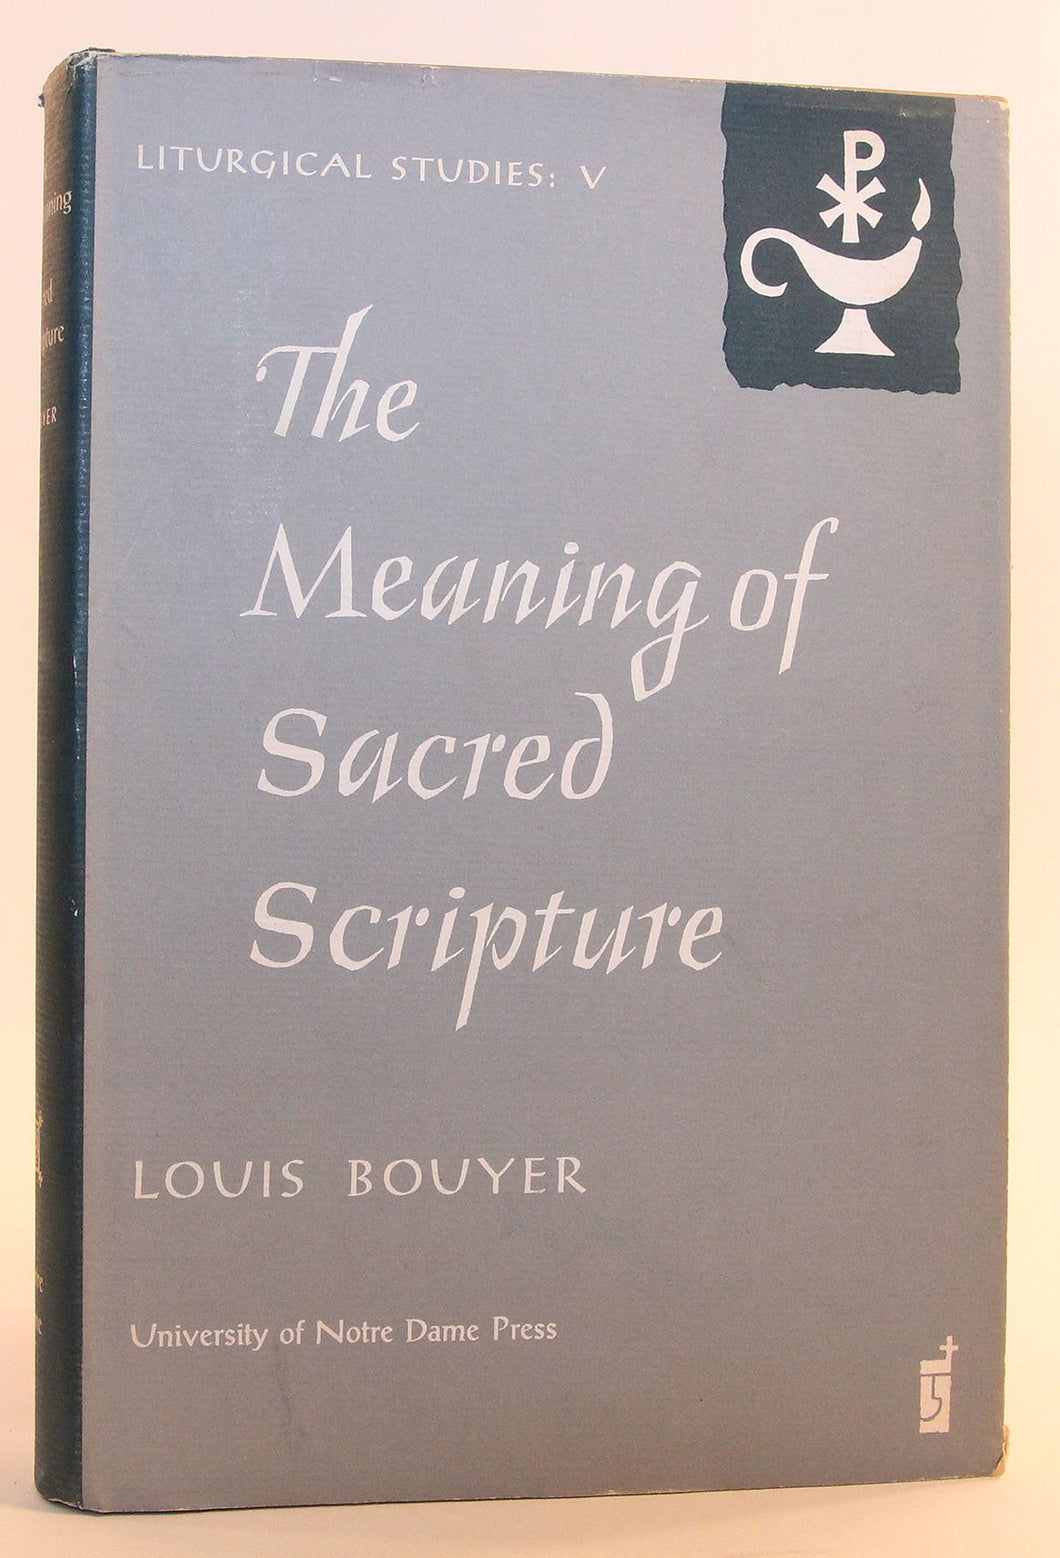 The meaning of Sacred Scripture